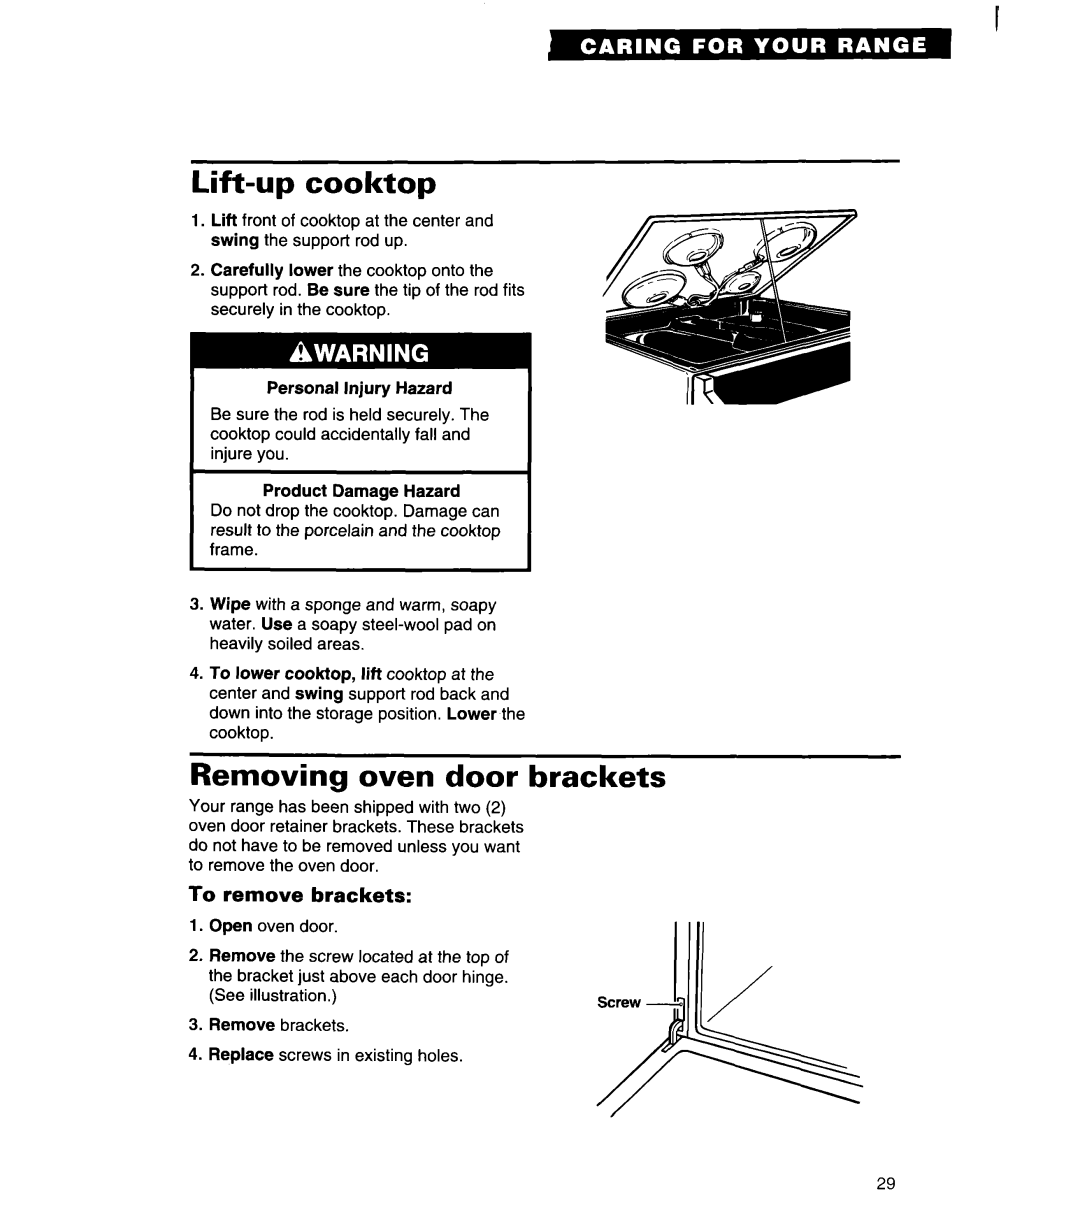 Roper FGP335Y important safety instructions Removing oven door brackets, Lift-upcooktop, To remove brackets 